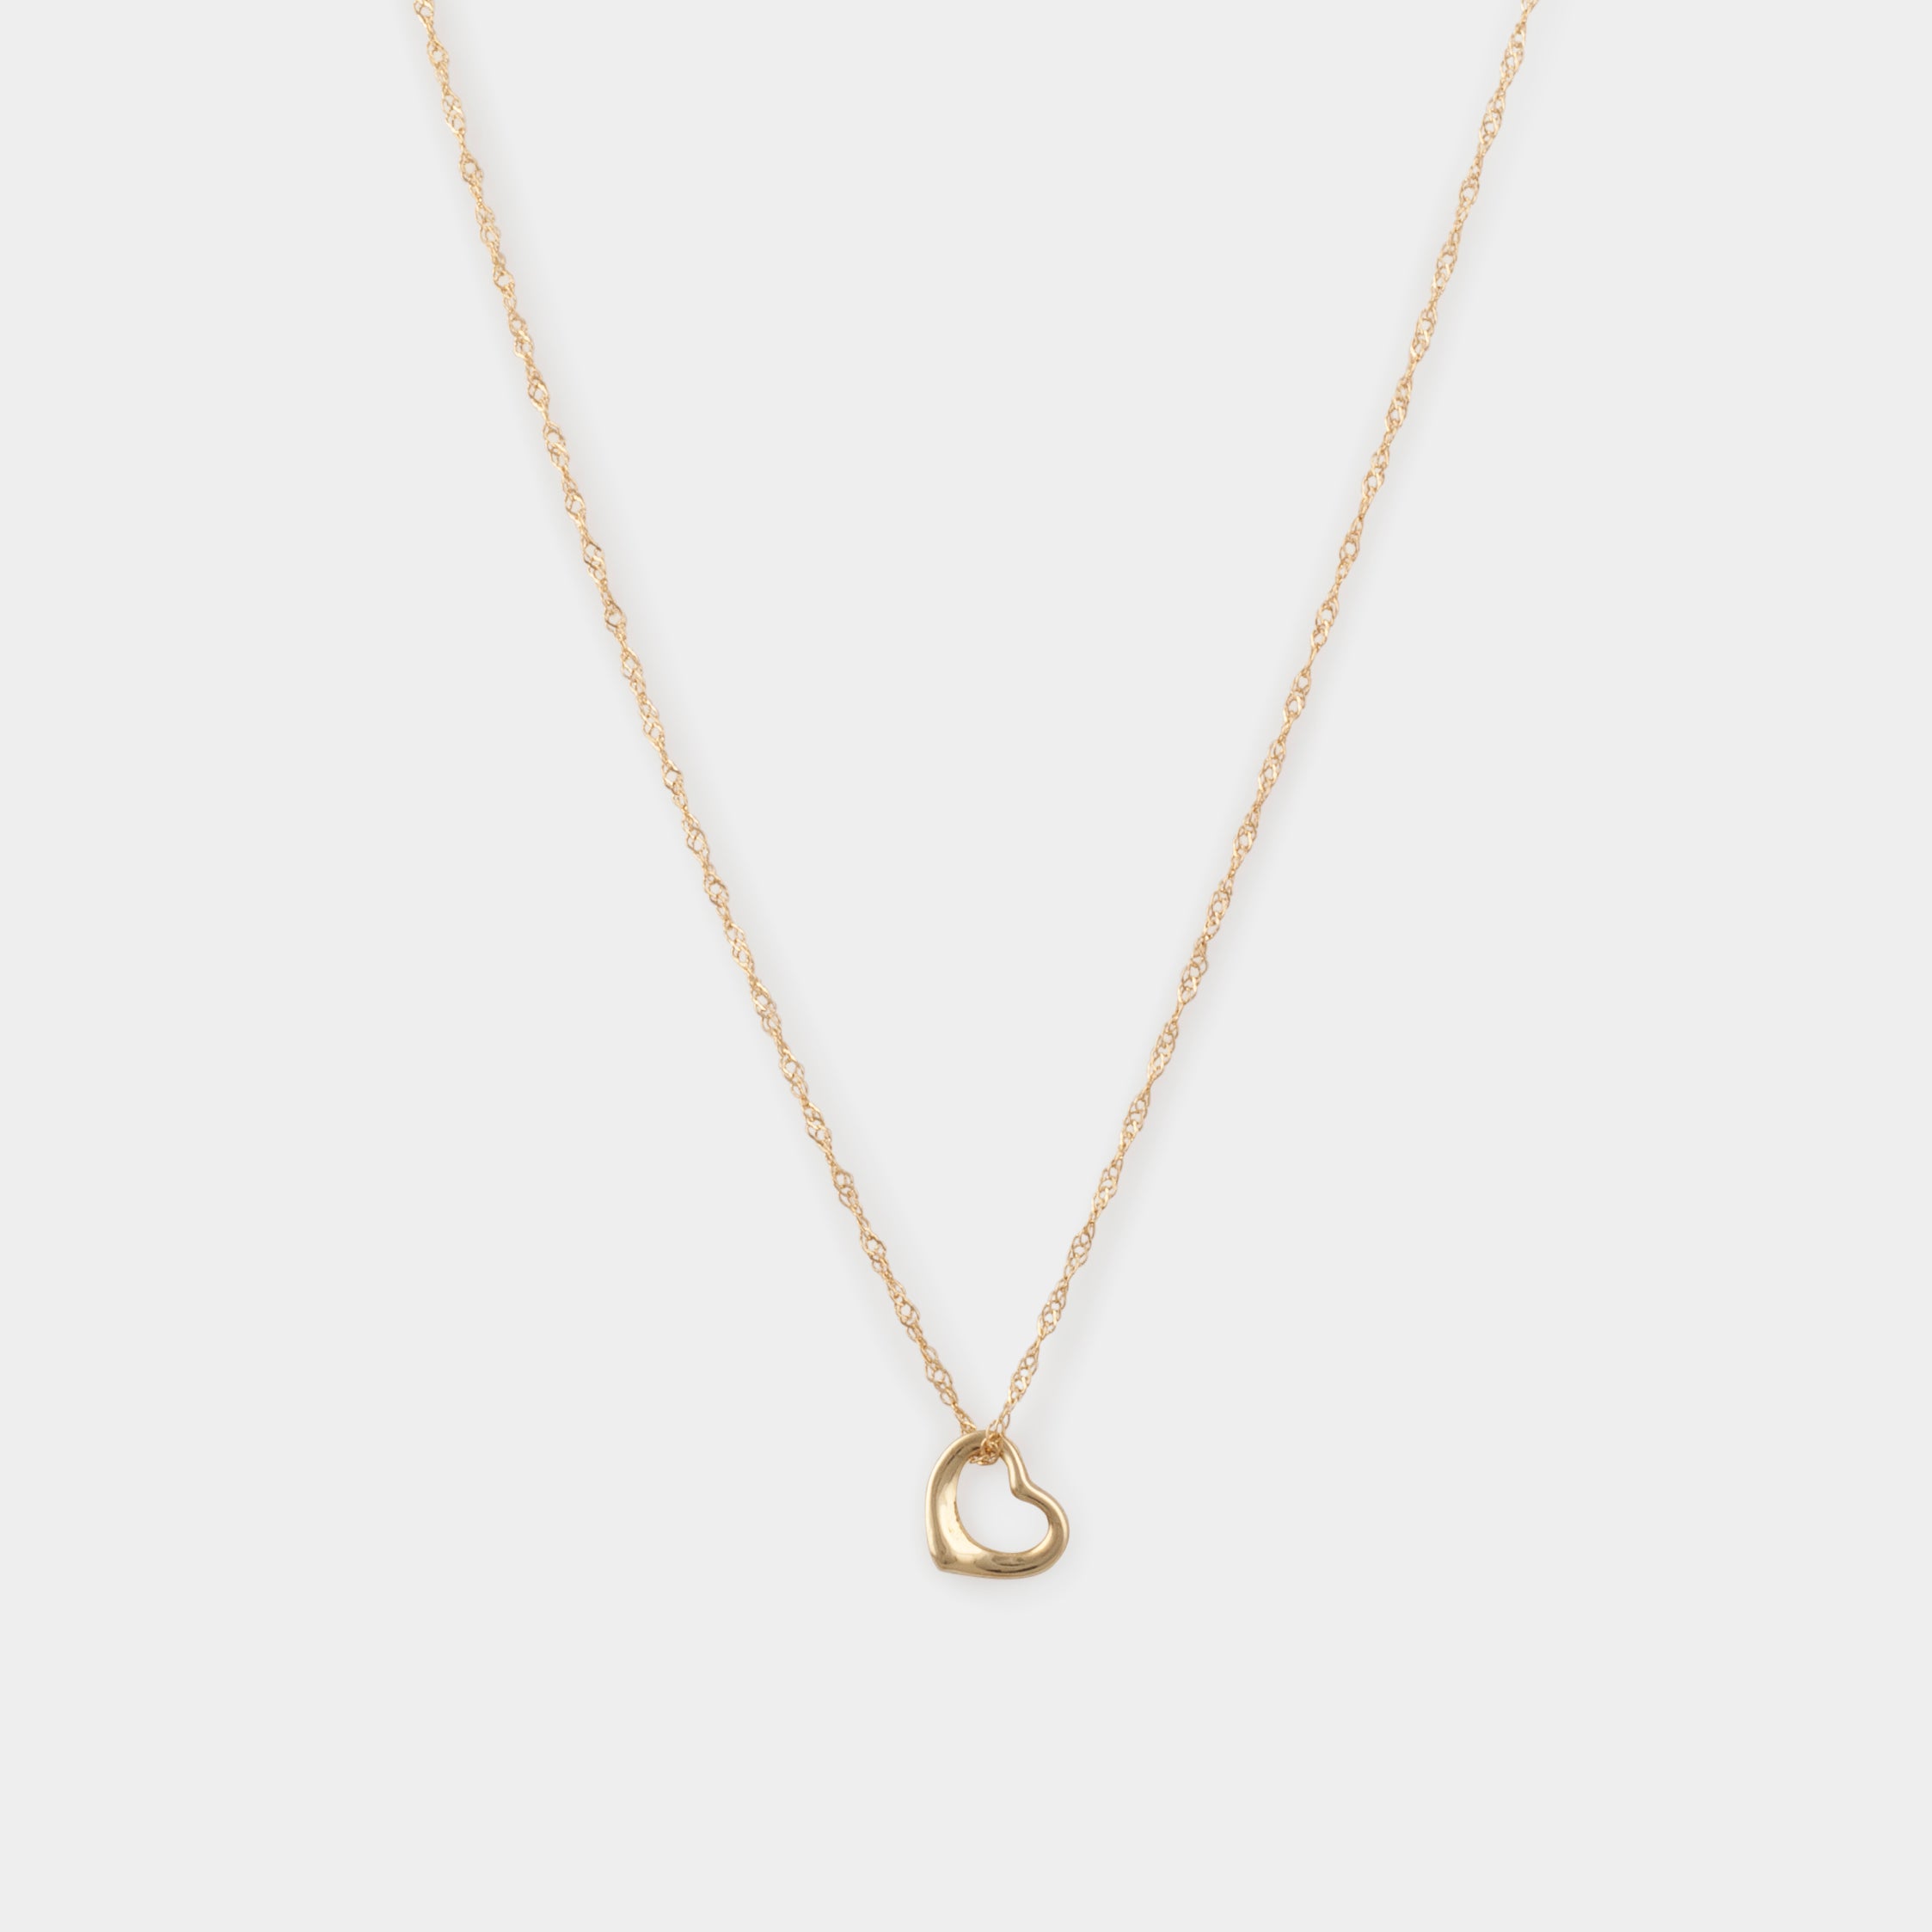 10k yellow gold Hollow Heart Shaped Charm on a Singapore Chain